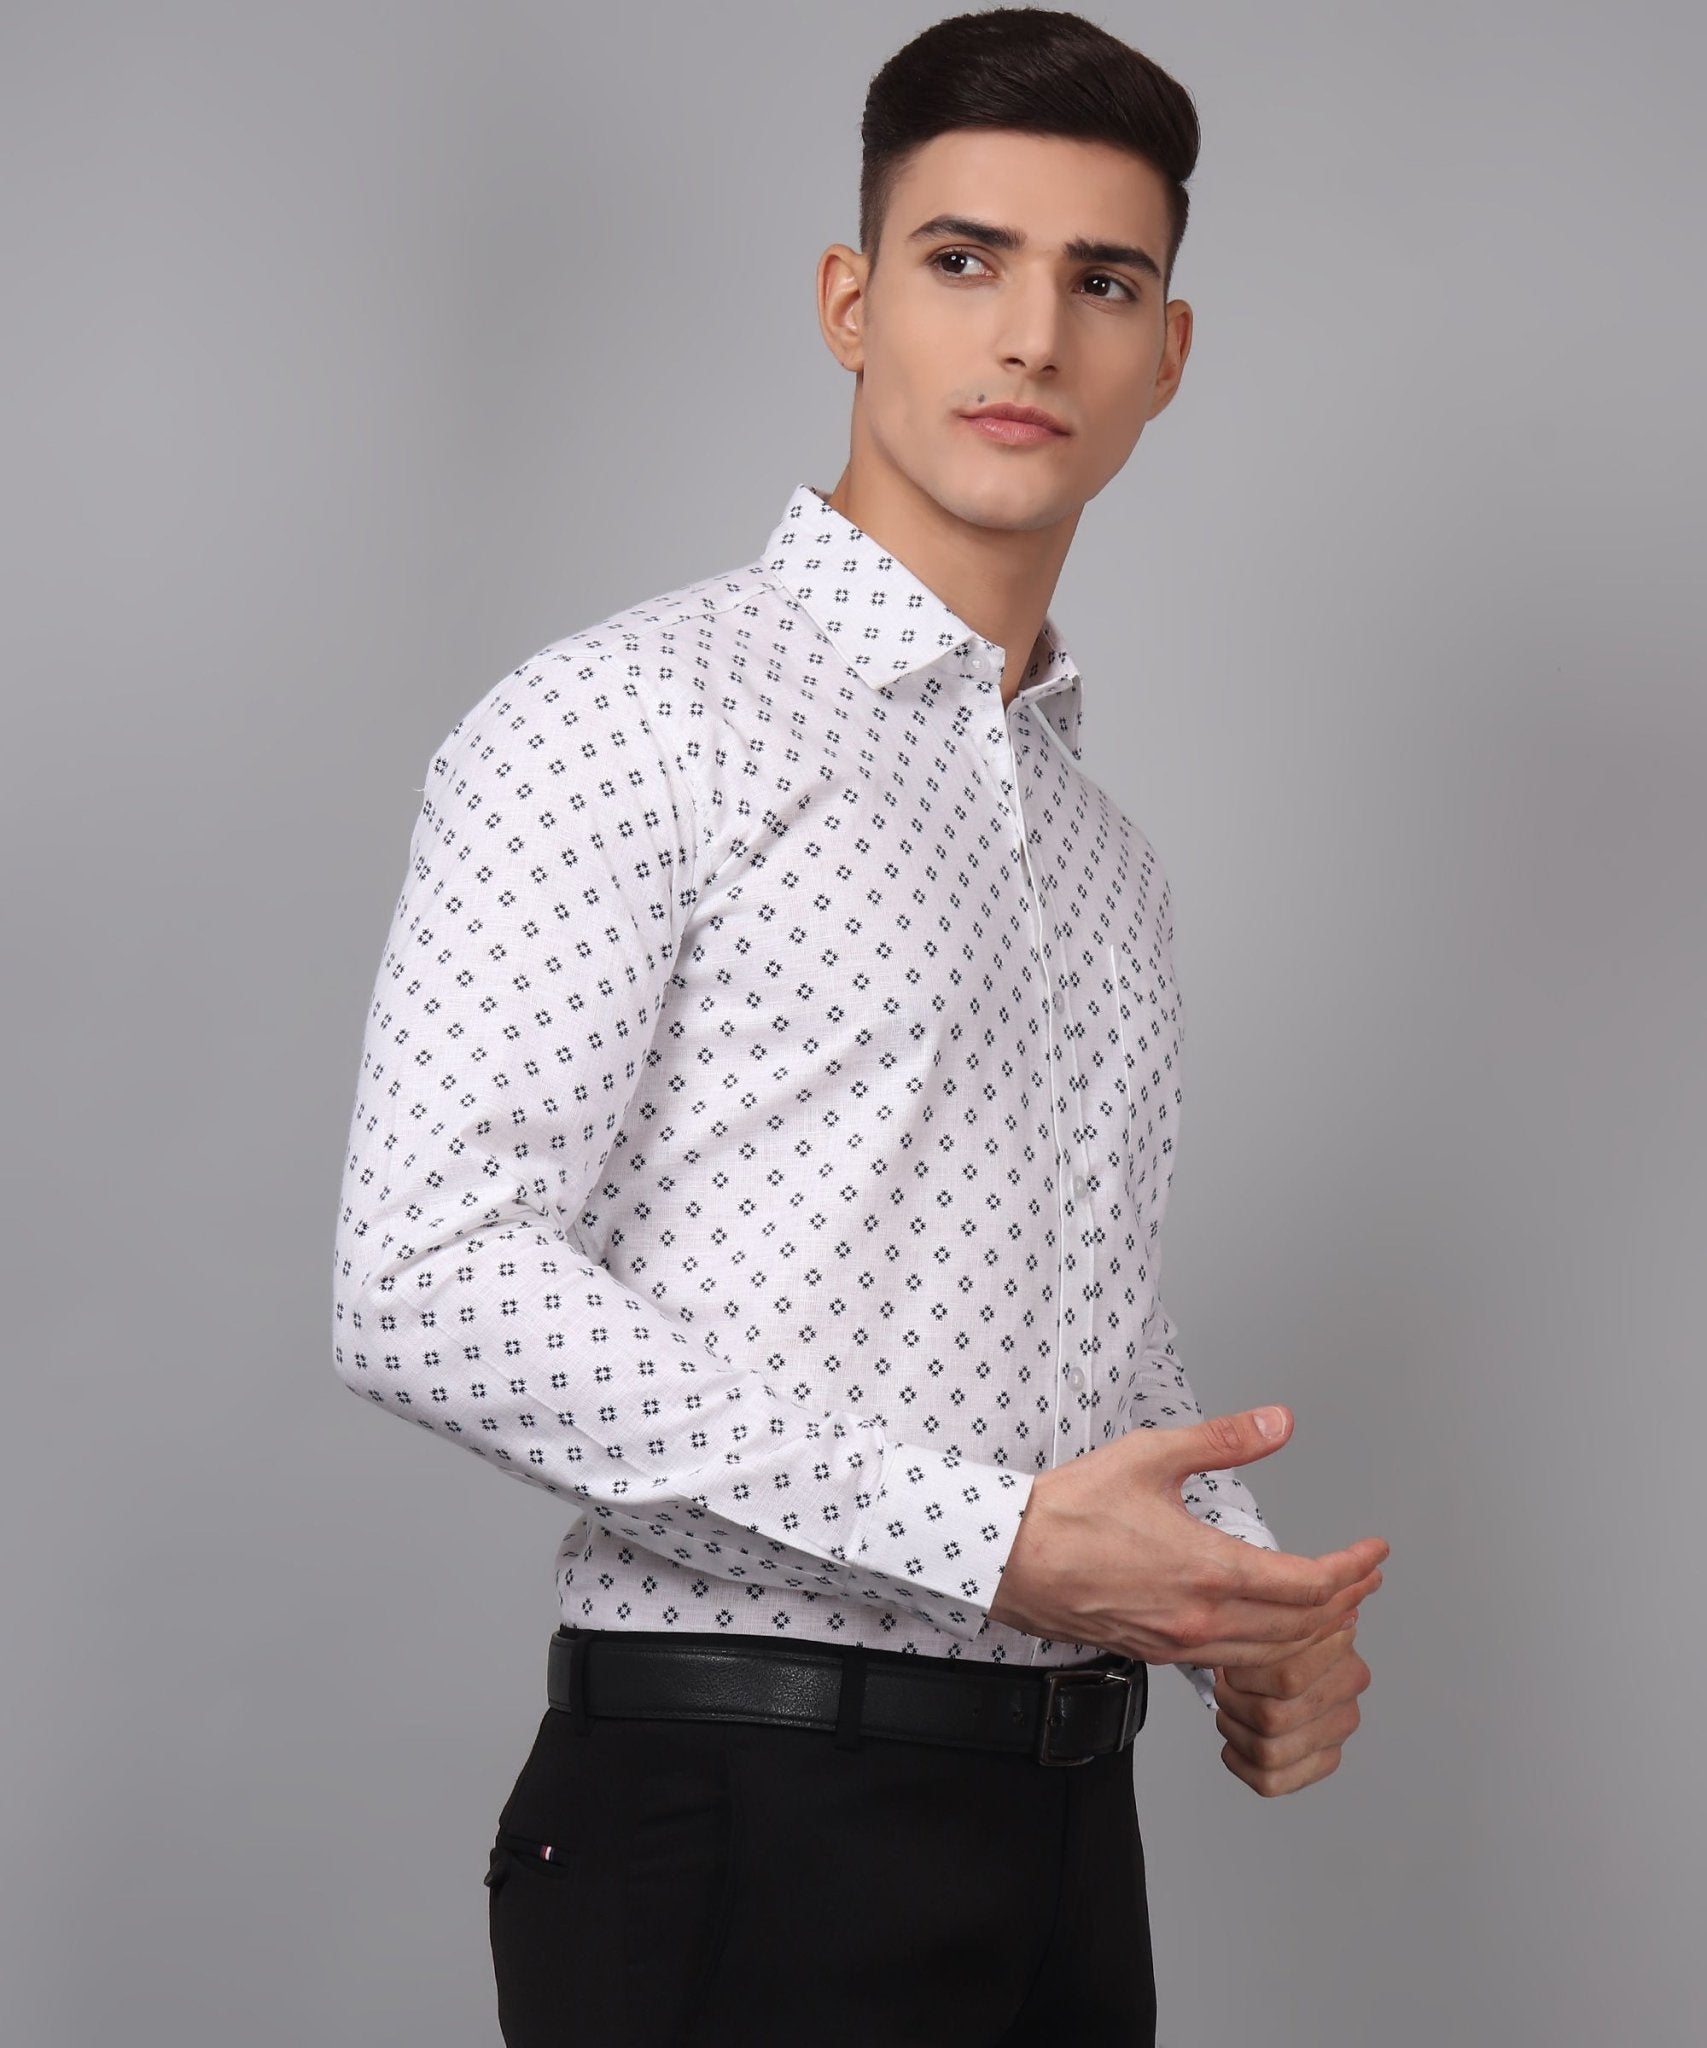 Luxe TryBuy Premium Cotton Linen White Printed Casual/Formal Shirt for Men - TryBuy® USA🇺🇸